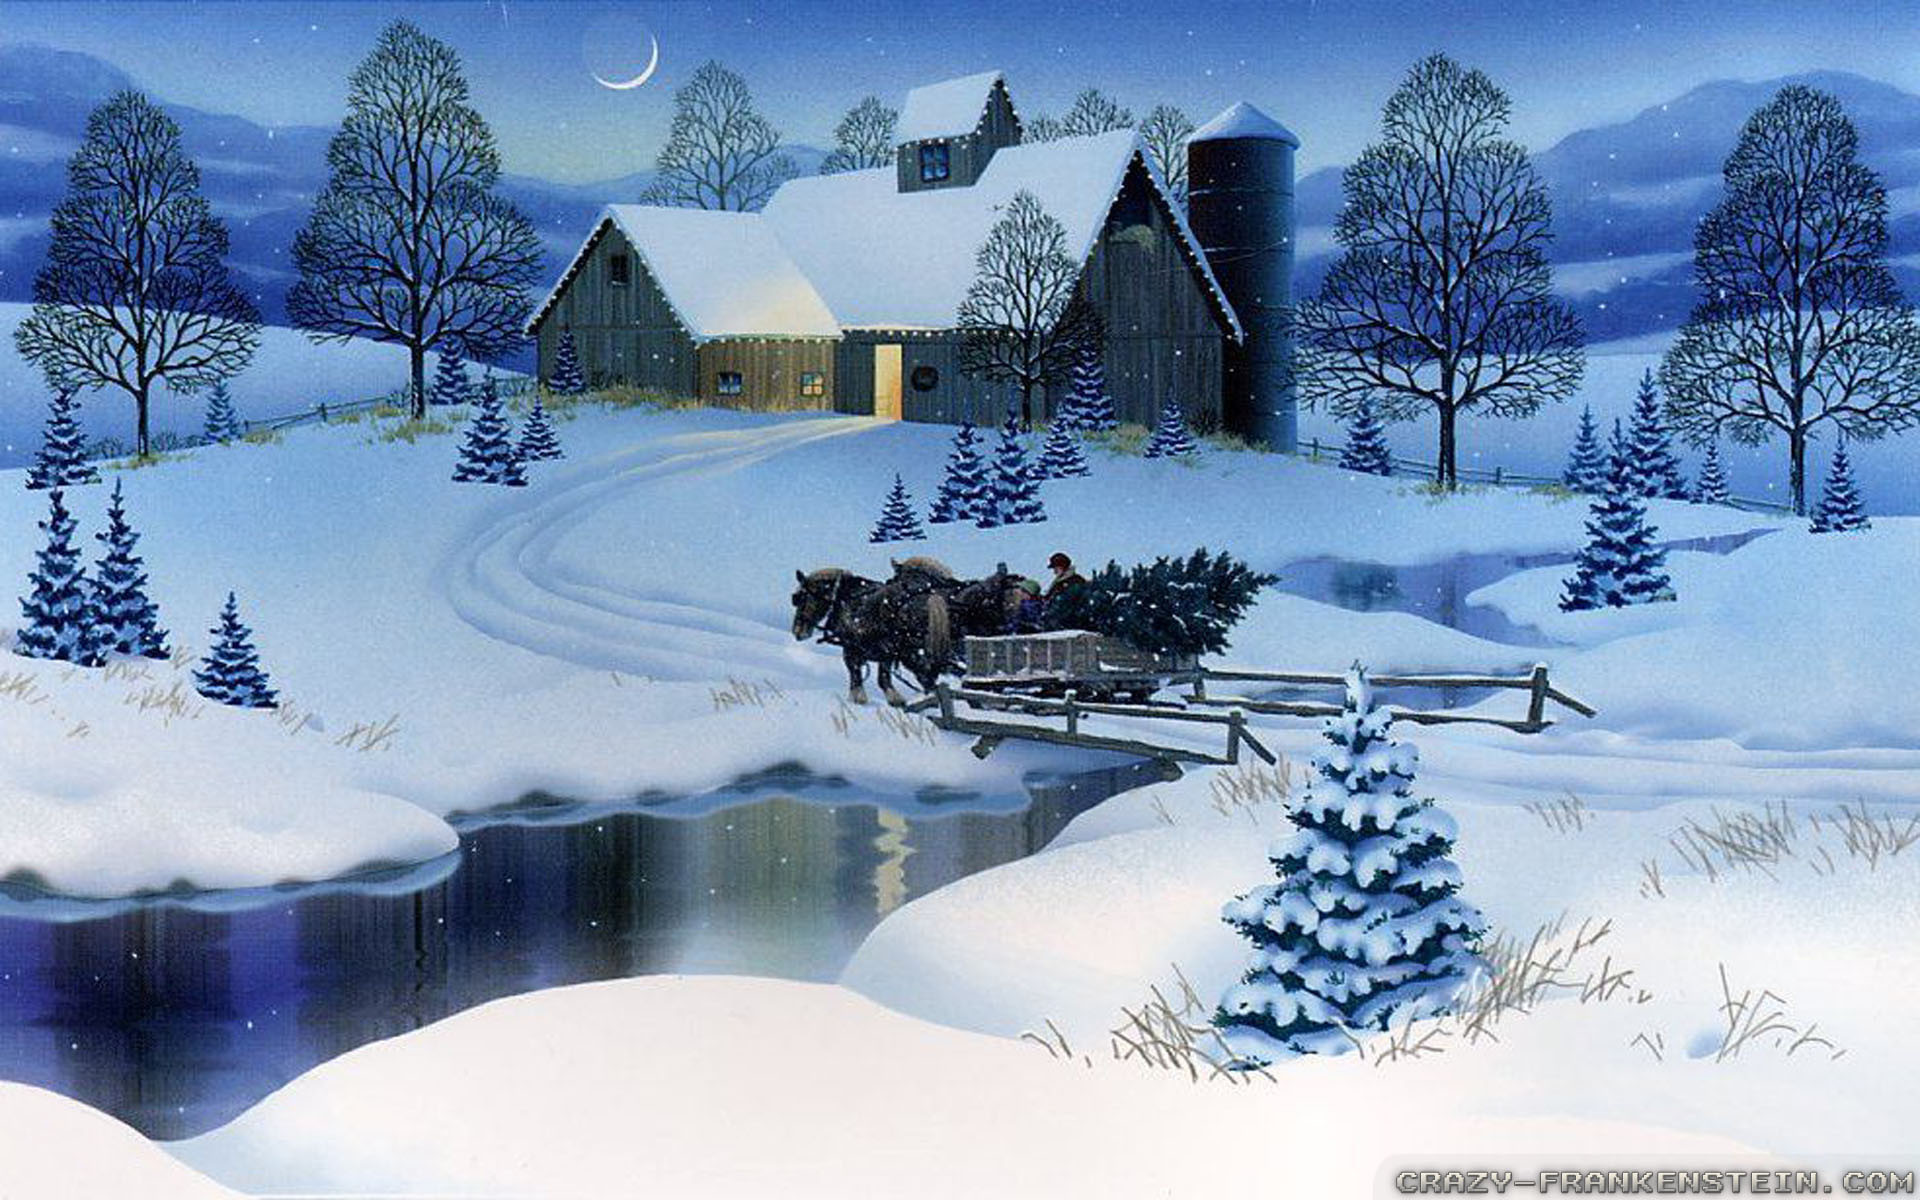 Christmas Scenery Wallpaper (45+ images)